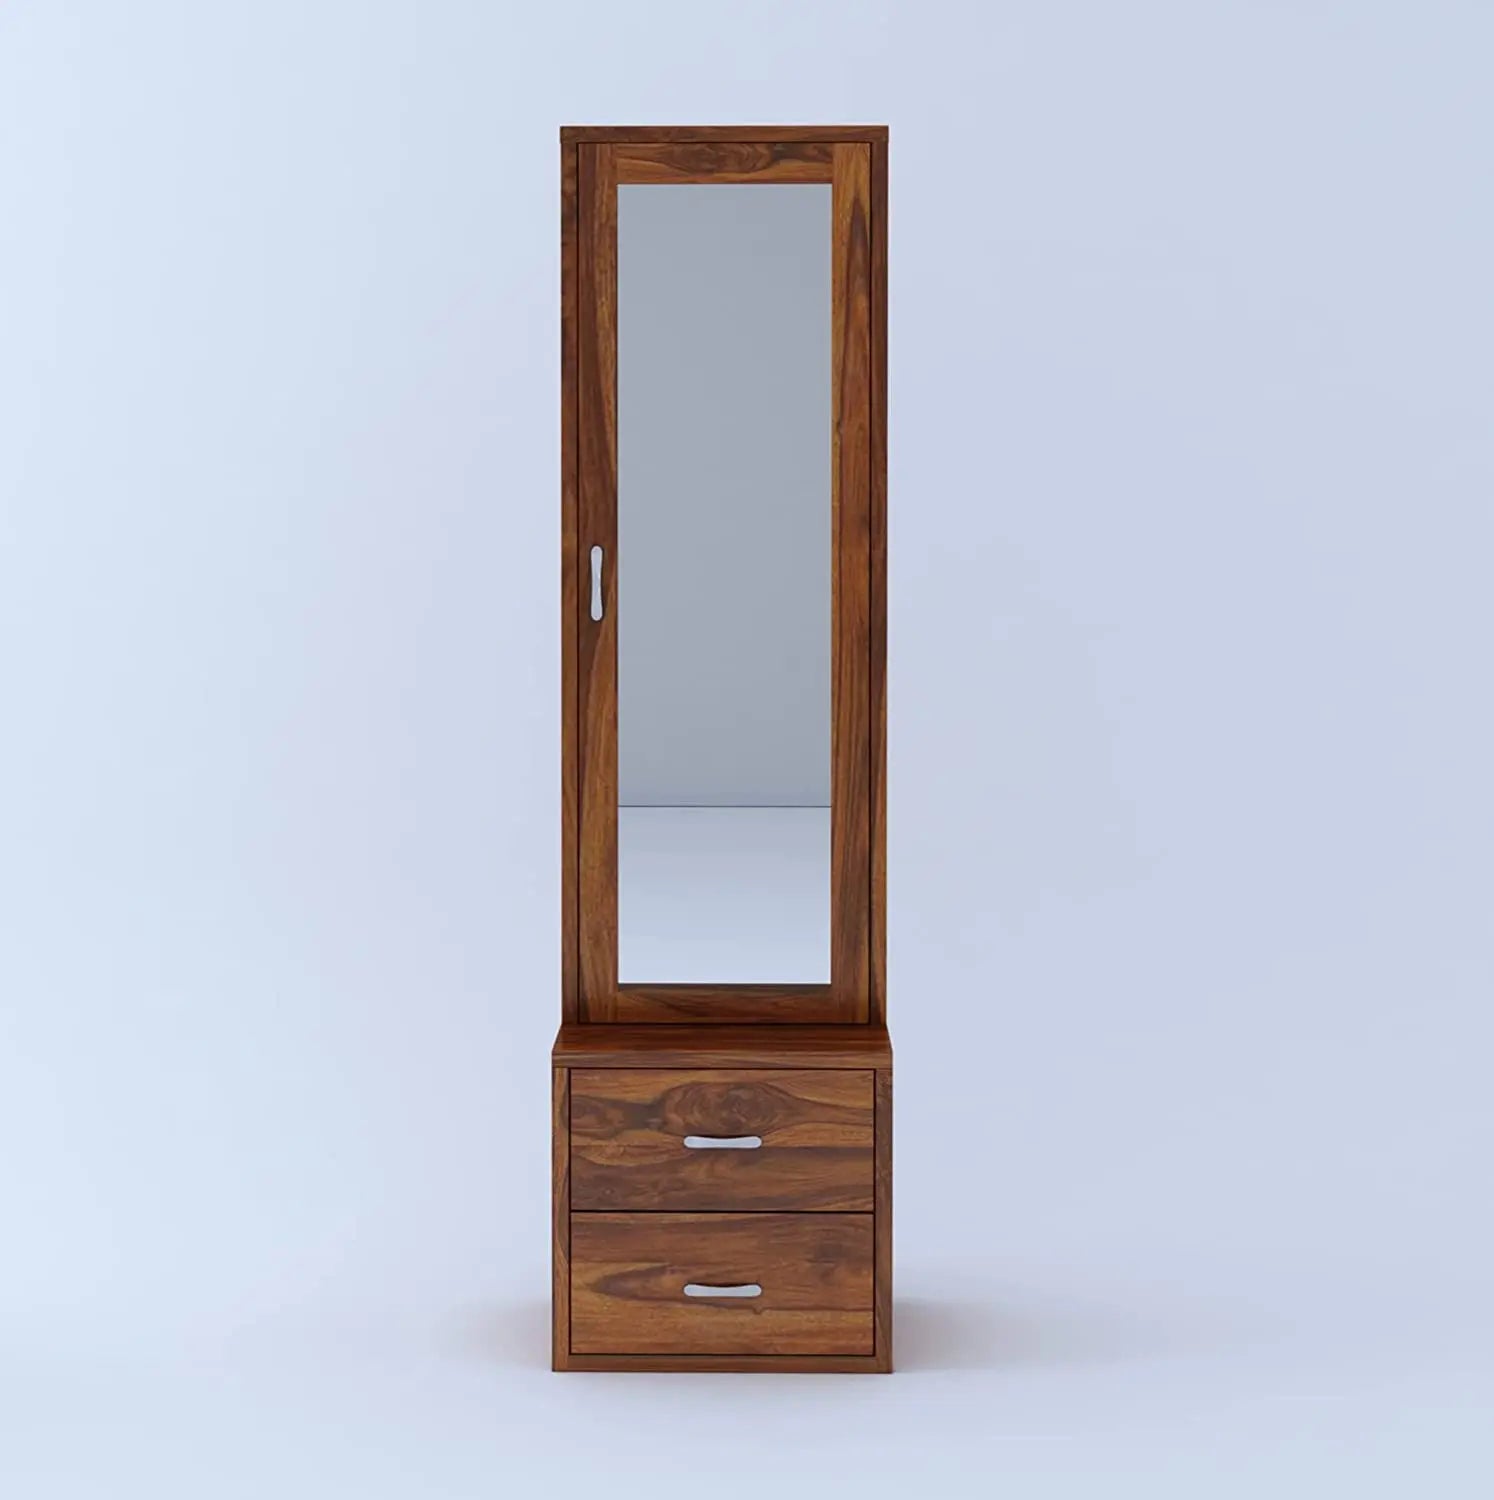 This dresser with a full-length mirror - ₹7,649 | Dressing mirror, Dressing  table decor, Dressing table mirror design